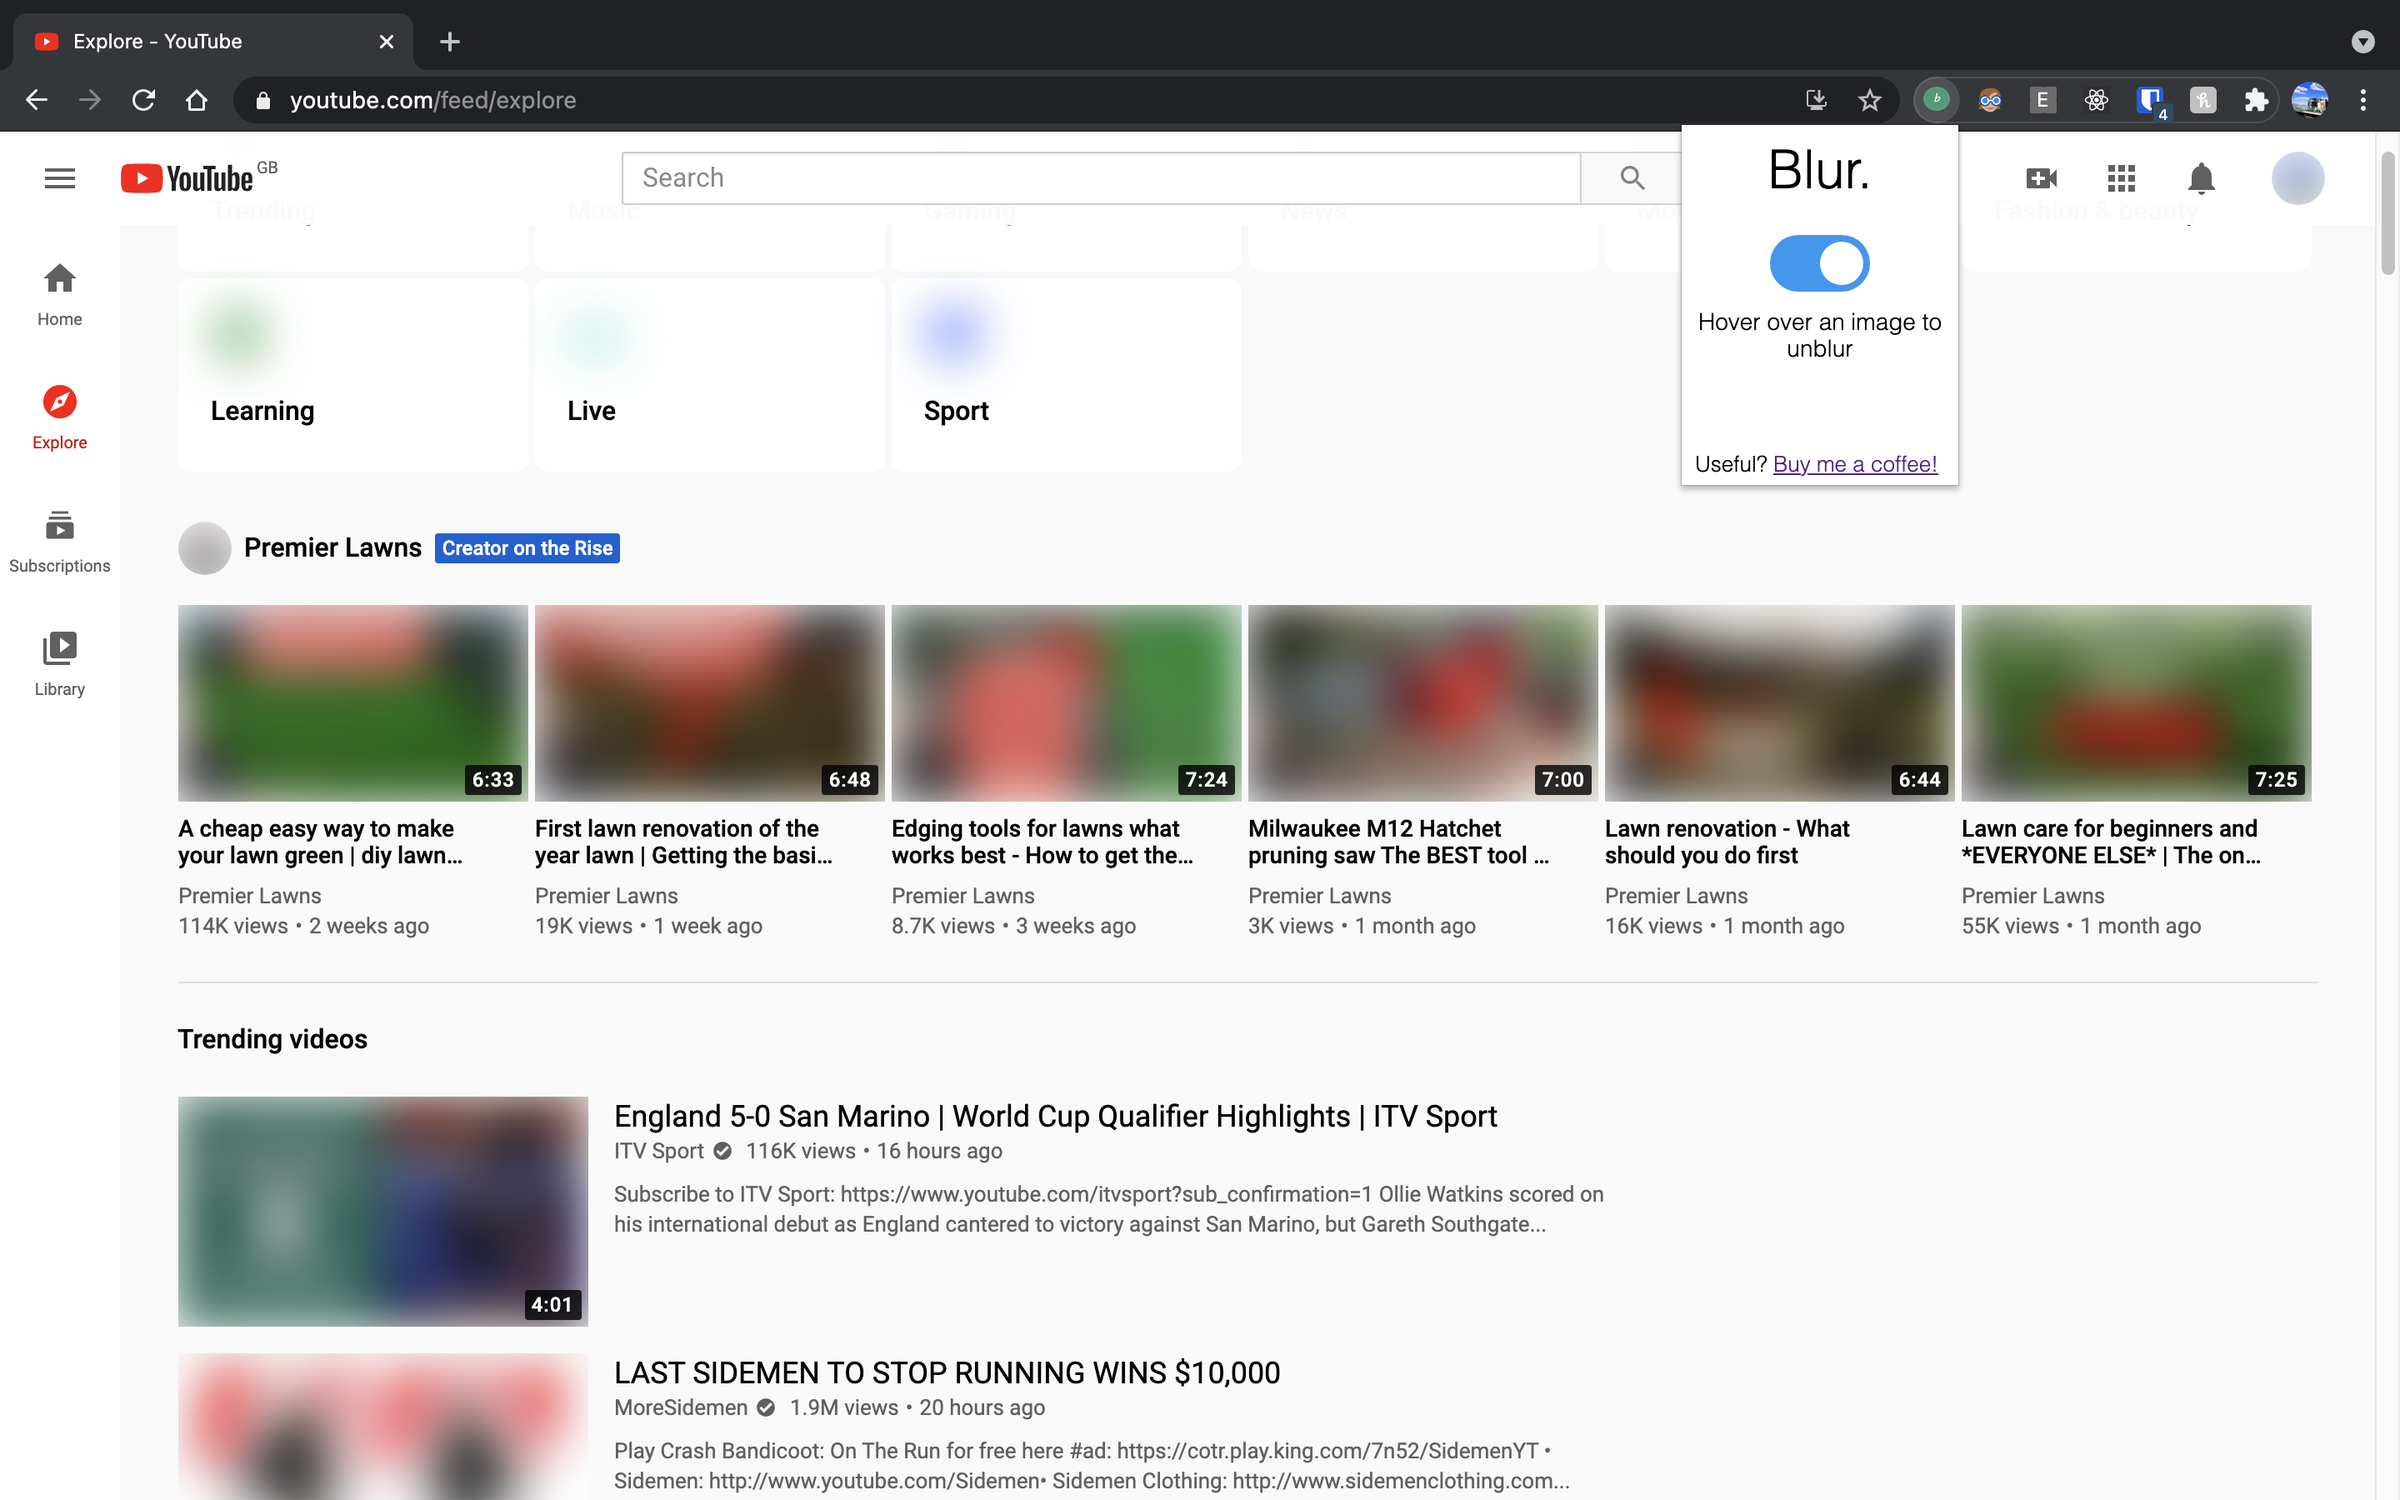 Blur. The Image and Video blur extension